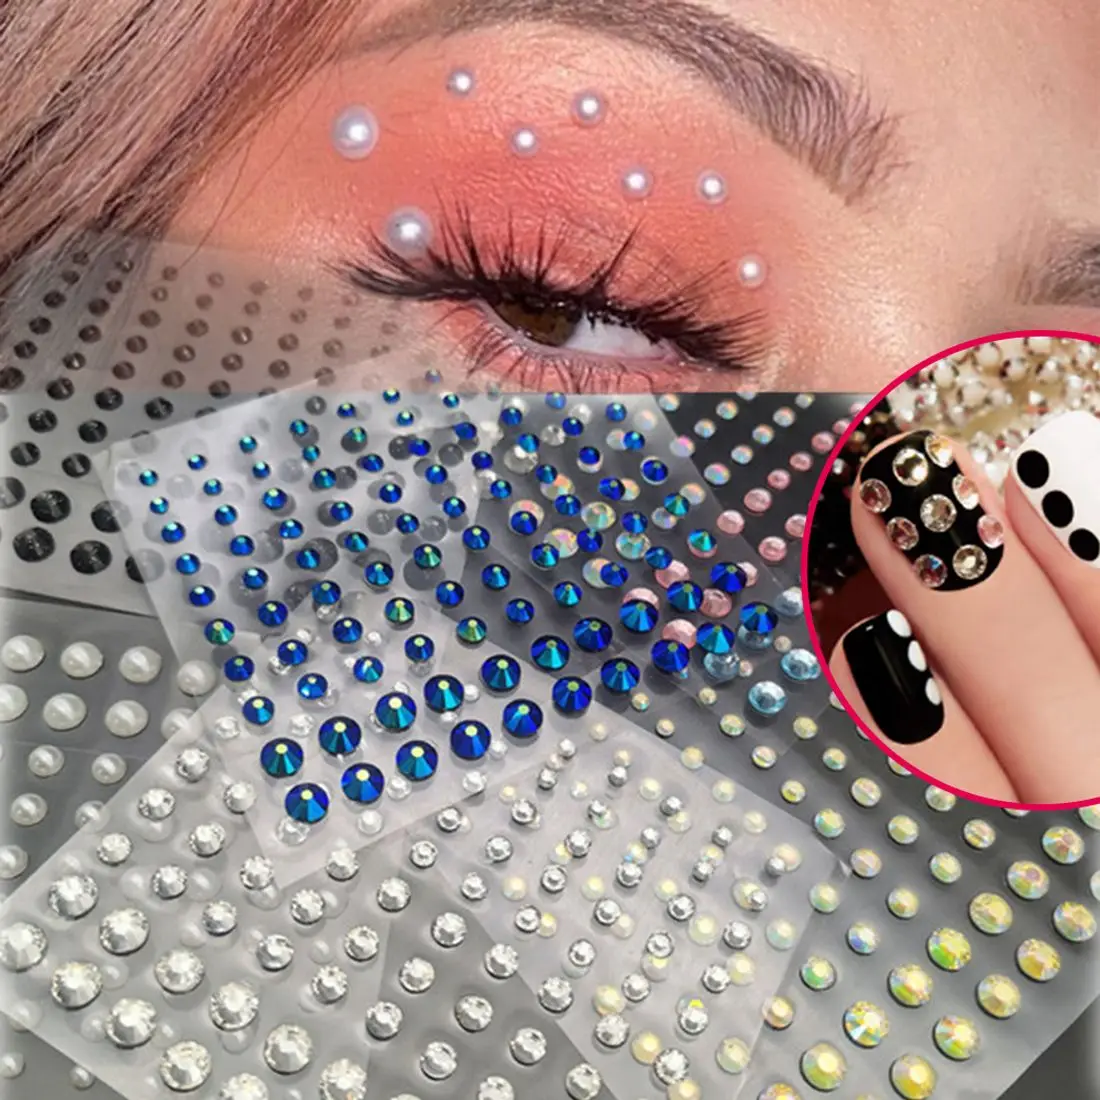 

Makeup Decoration Face Body Colored Diamonds Jewels Party Festival Pearls Stickers Self Adhesive EyeShadow Acrylic Sticker